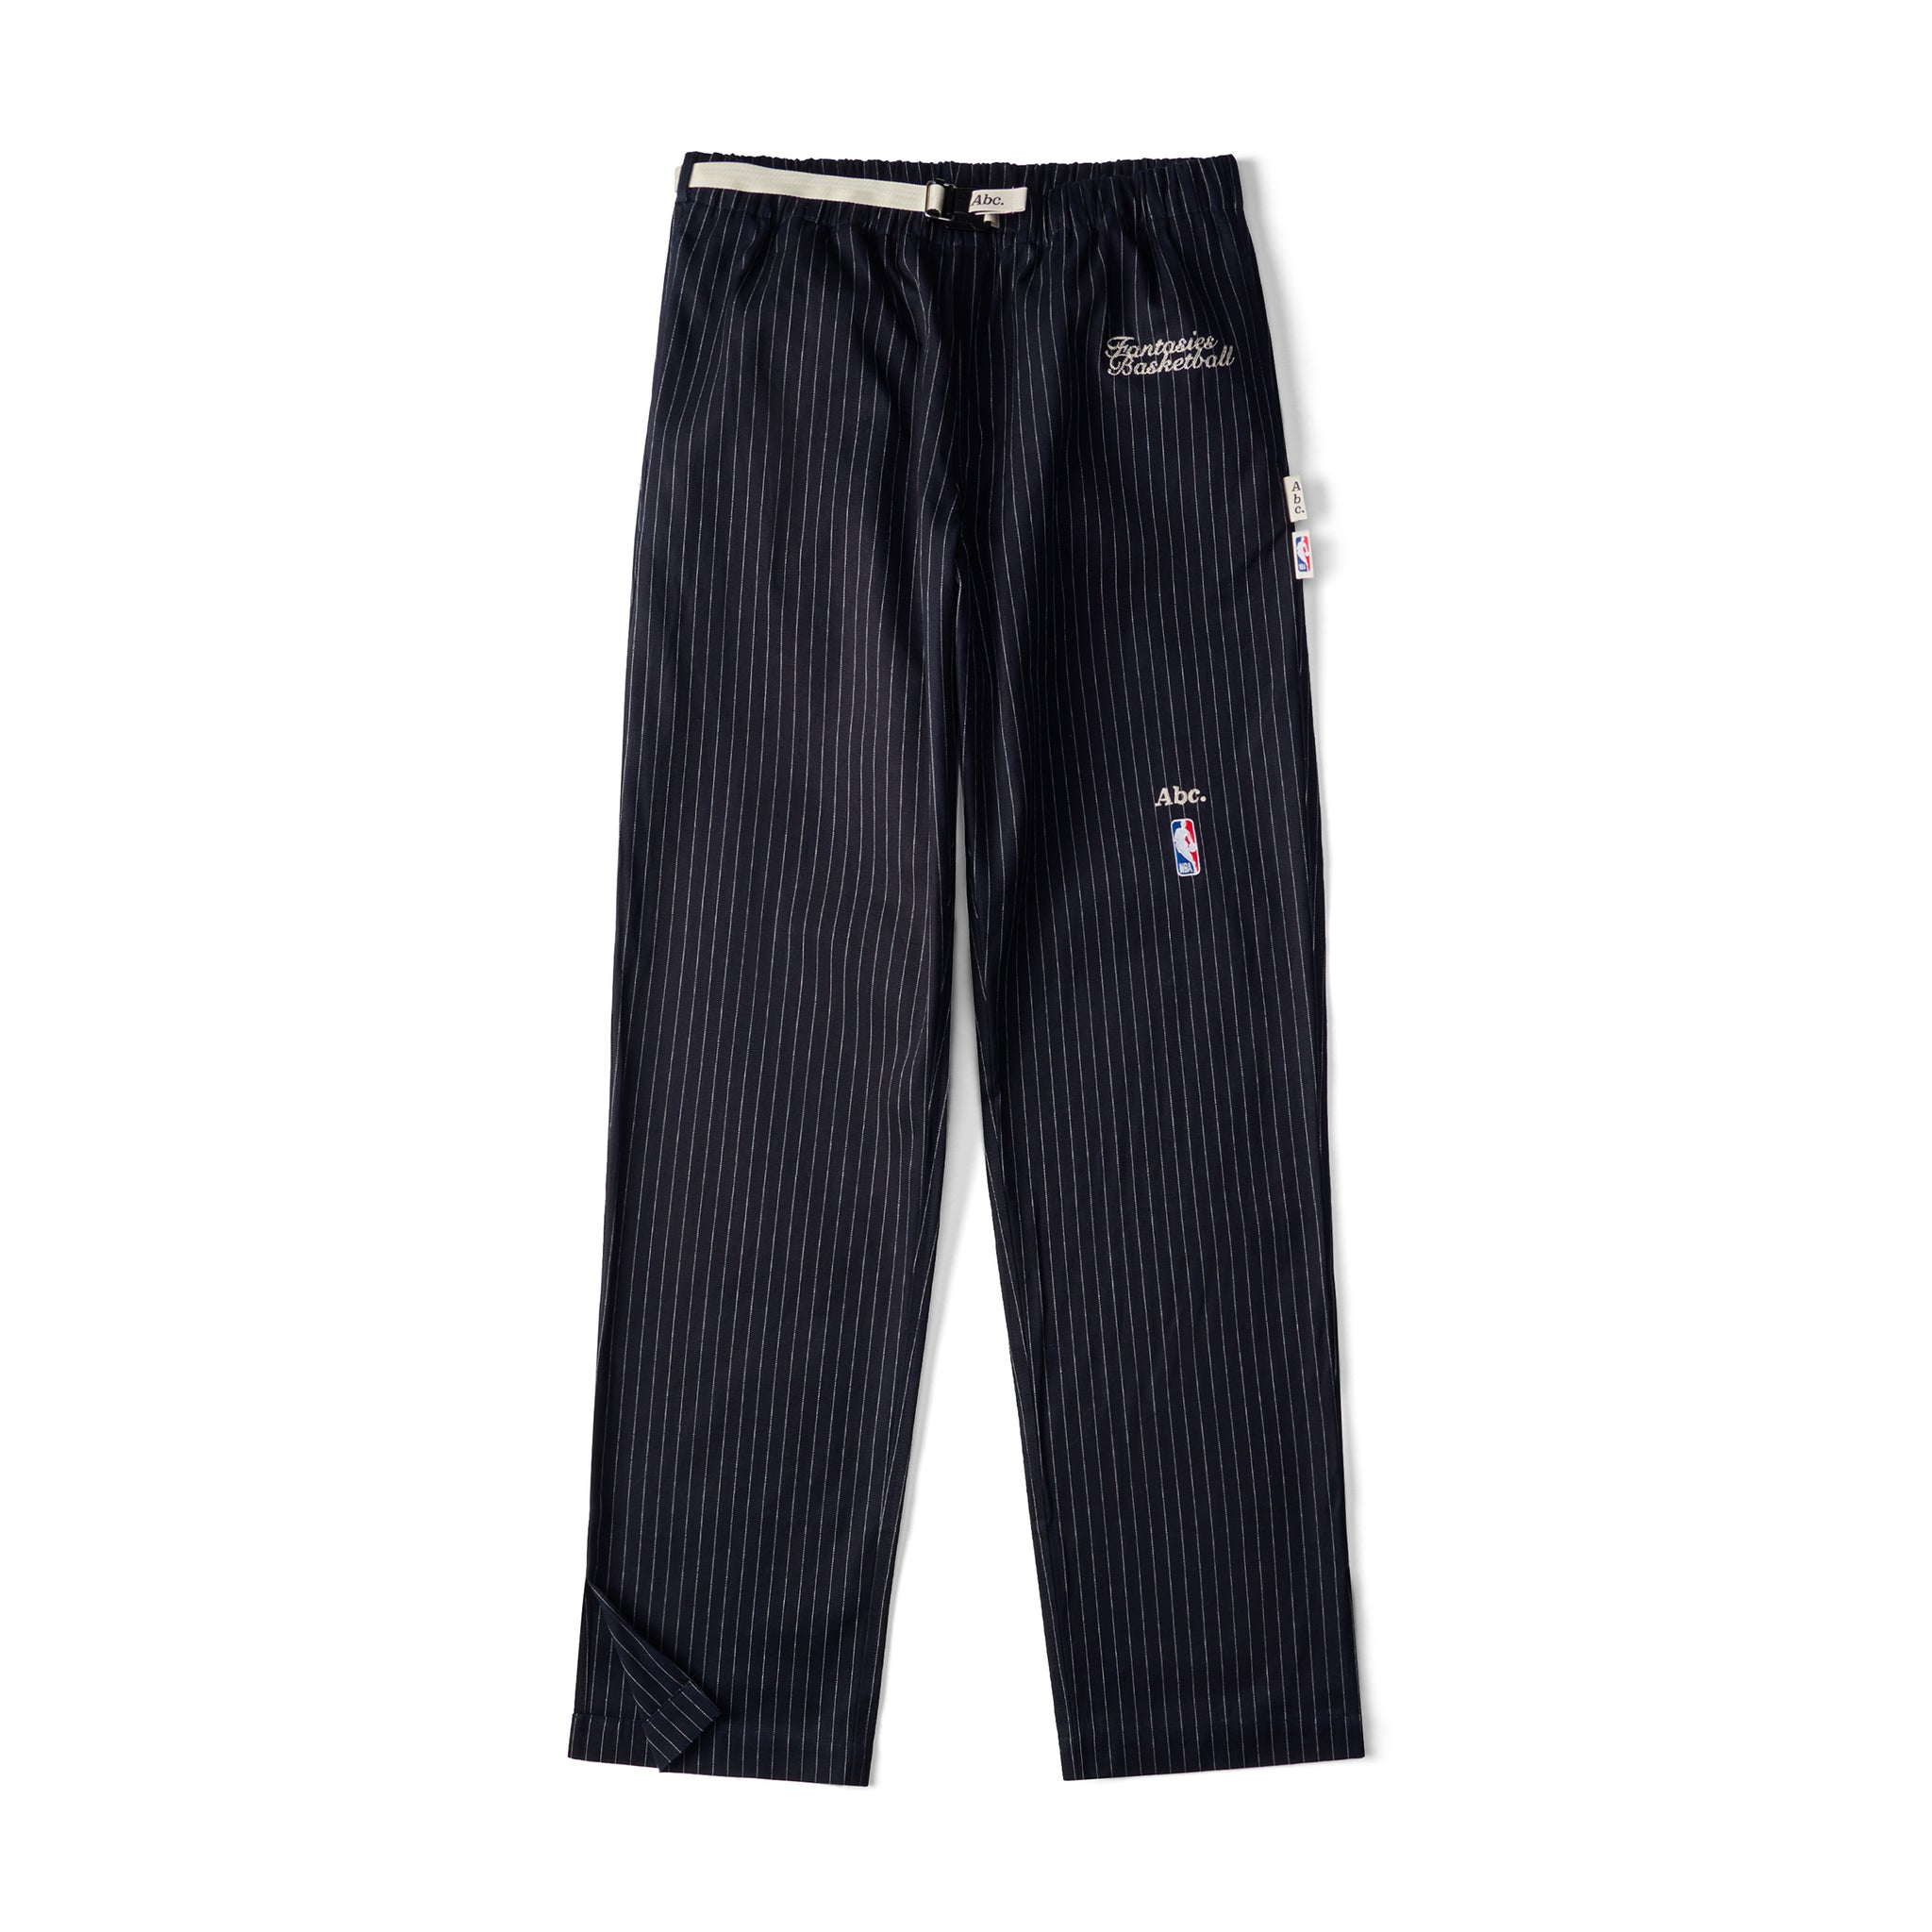 Abc. NBA Tunnel Suiting Pant